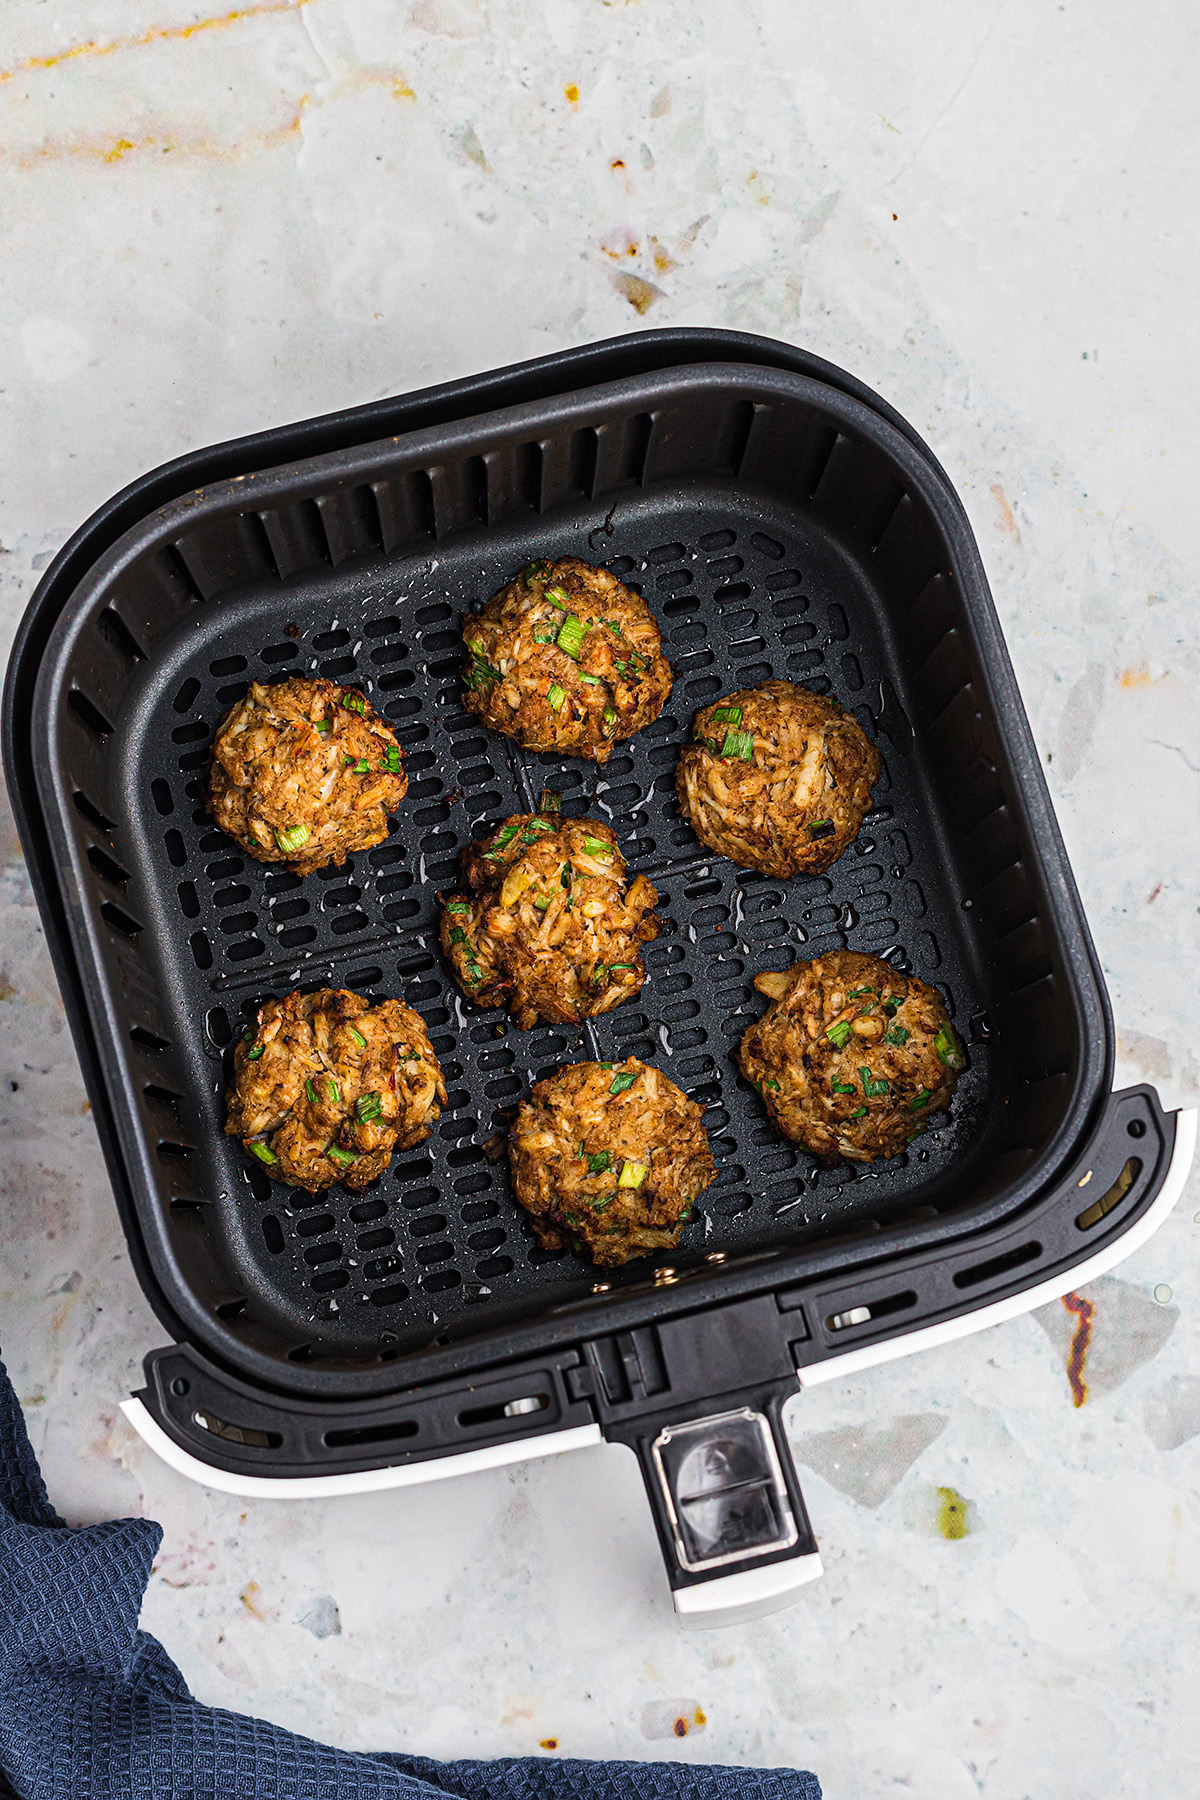 OVerhead view of 7 crab cakes cooked in an air fryer basket.